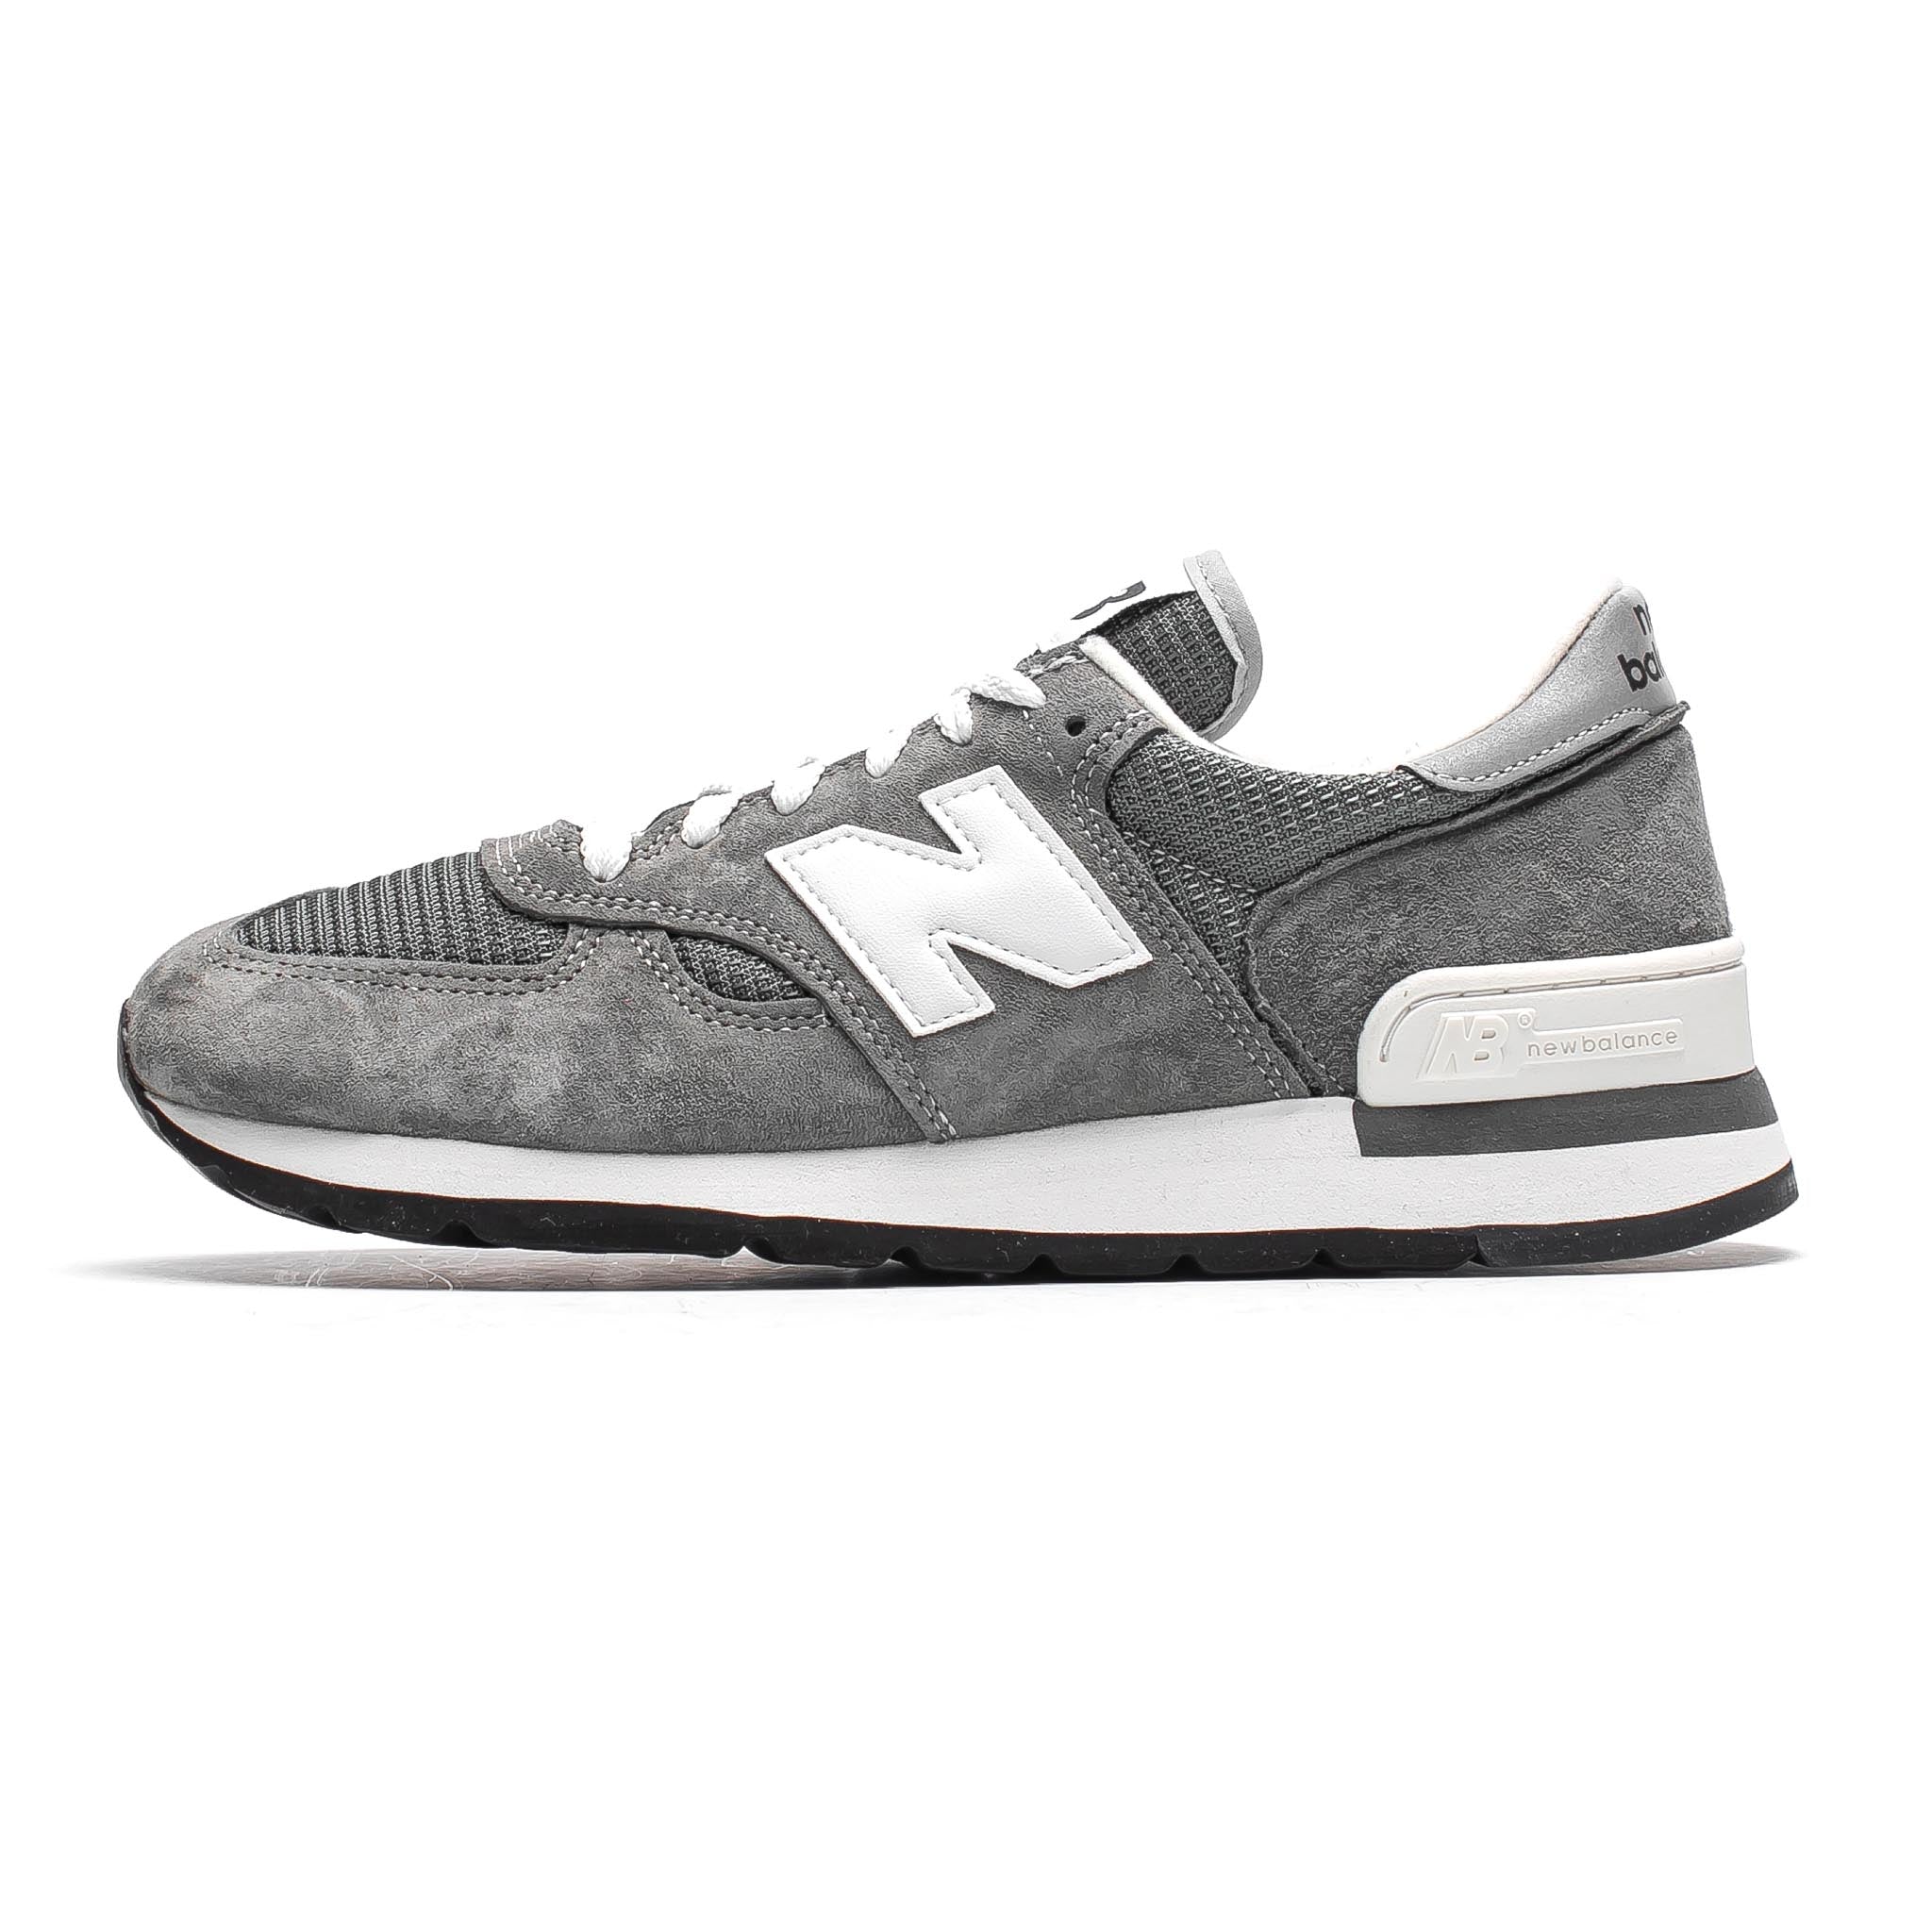 New Balance 'Made in the USA' M990GRY Grey